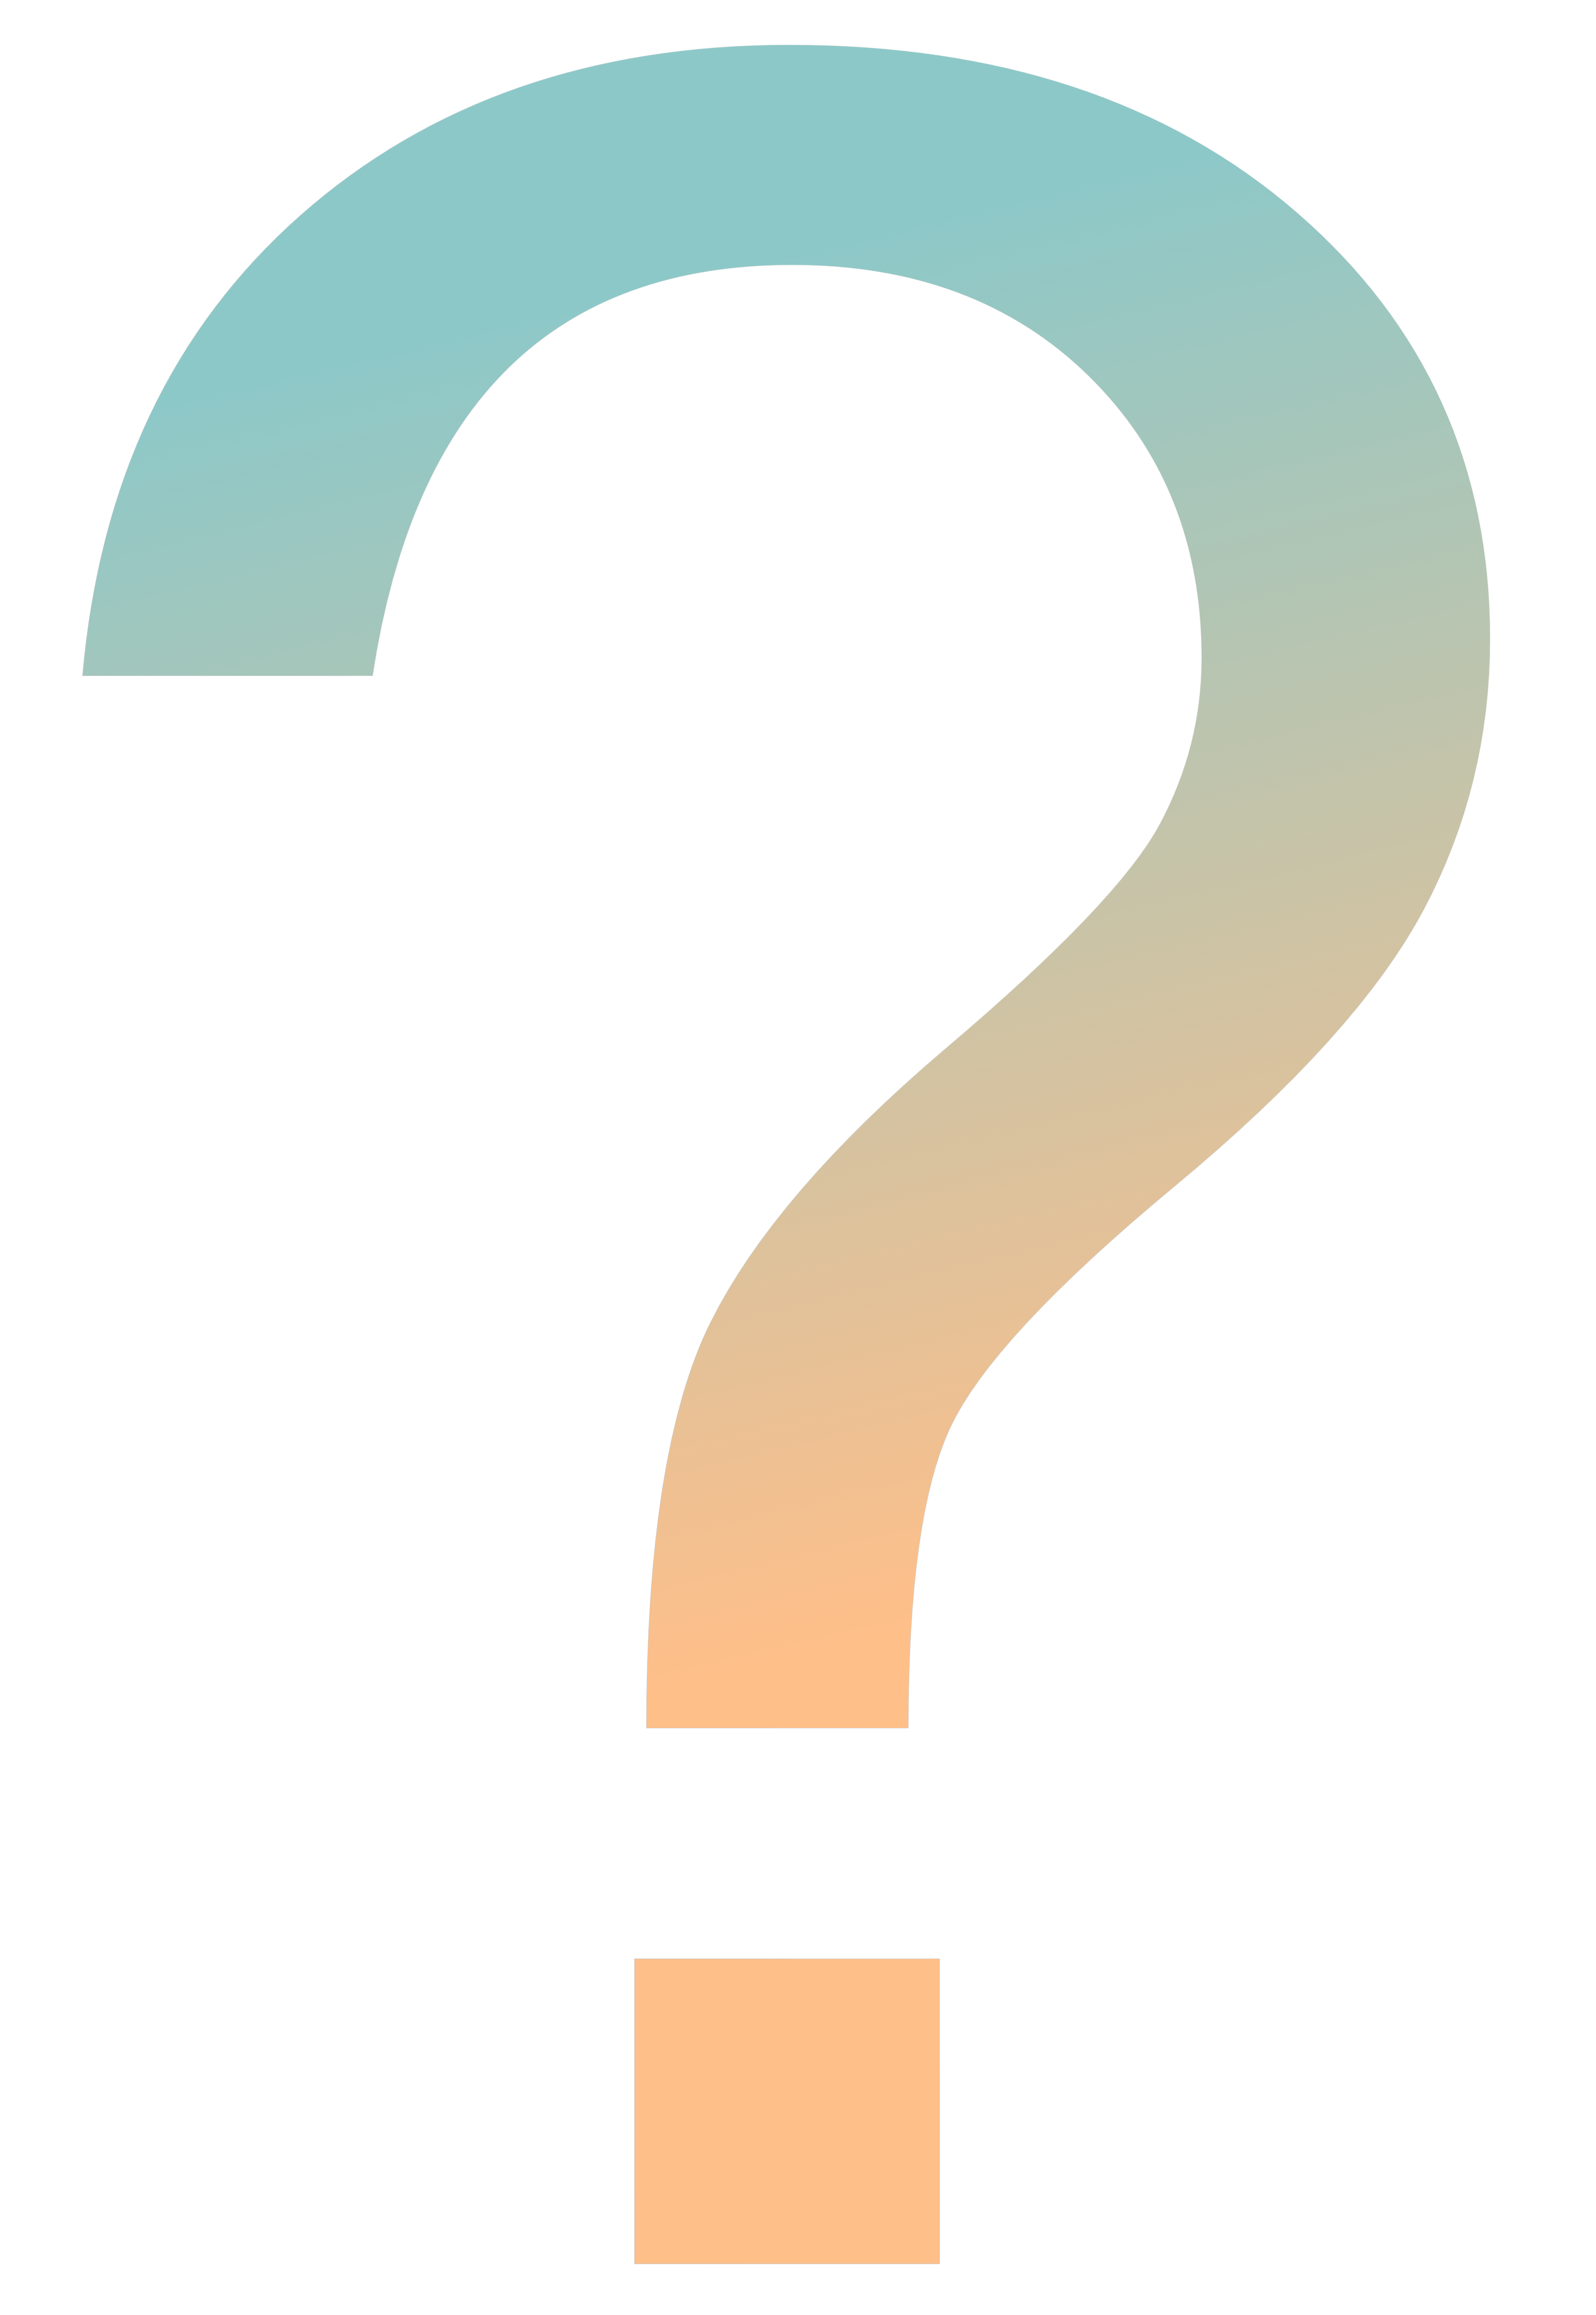 background image of a question mark with a pastel gradient Blue, Green, Yellow 